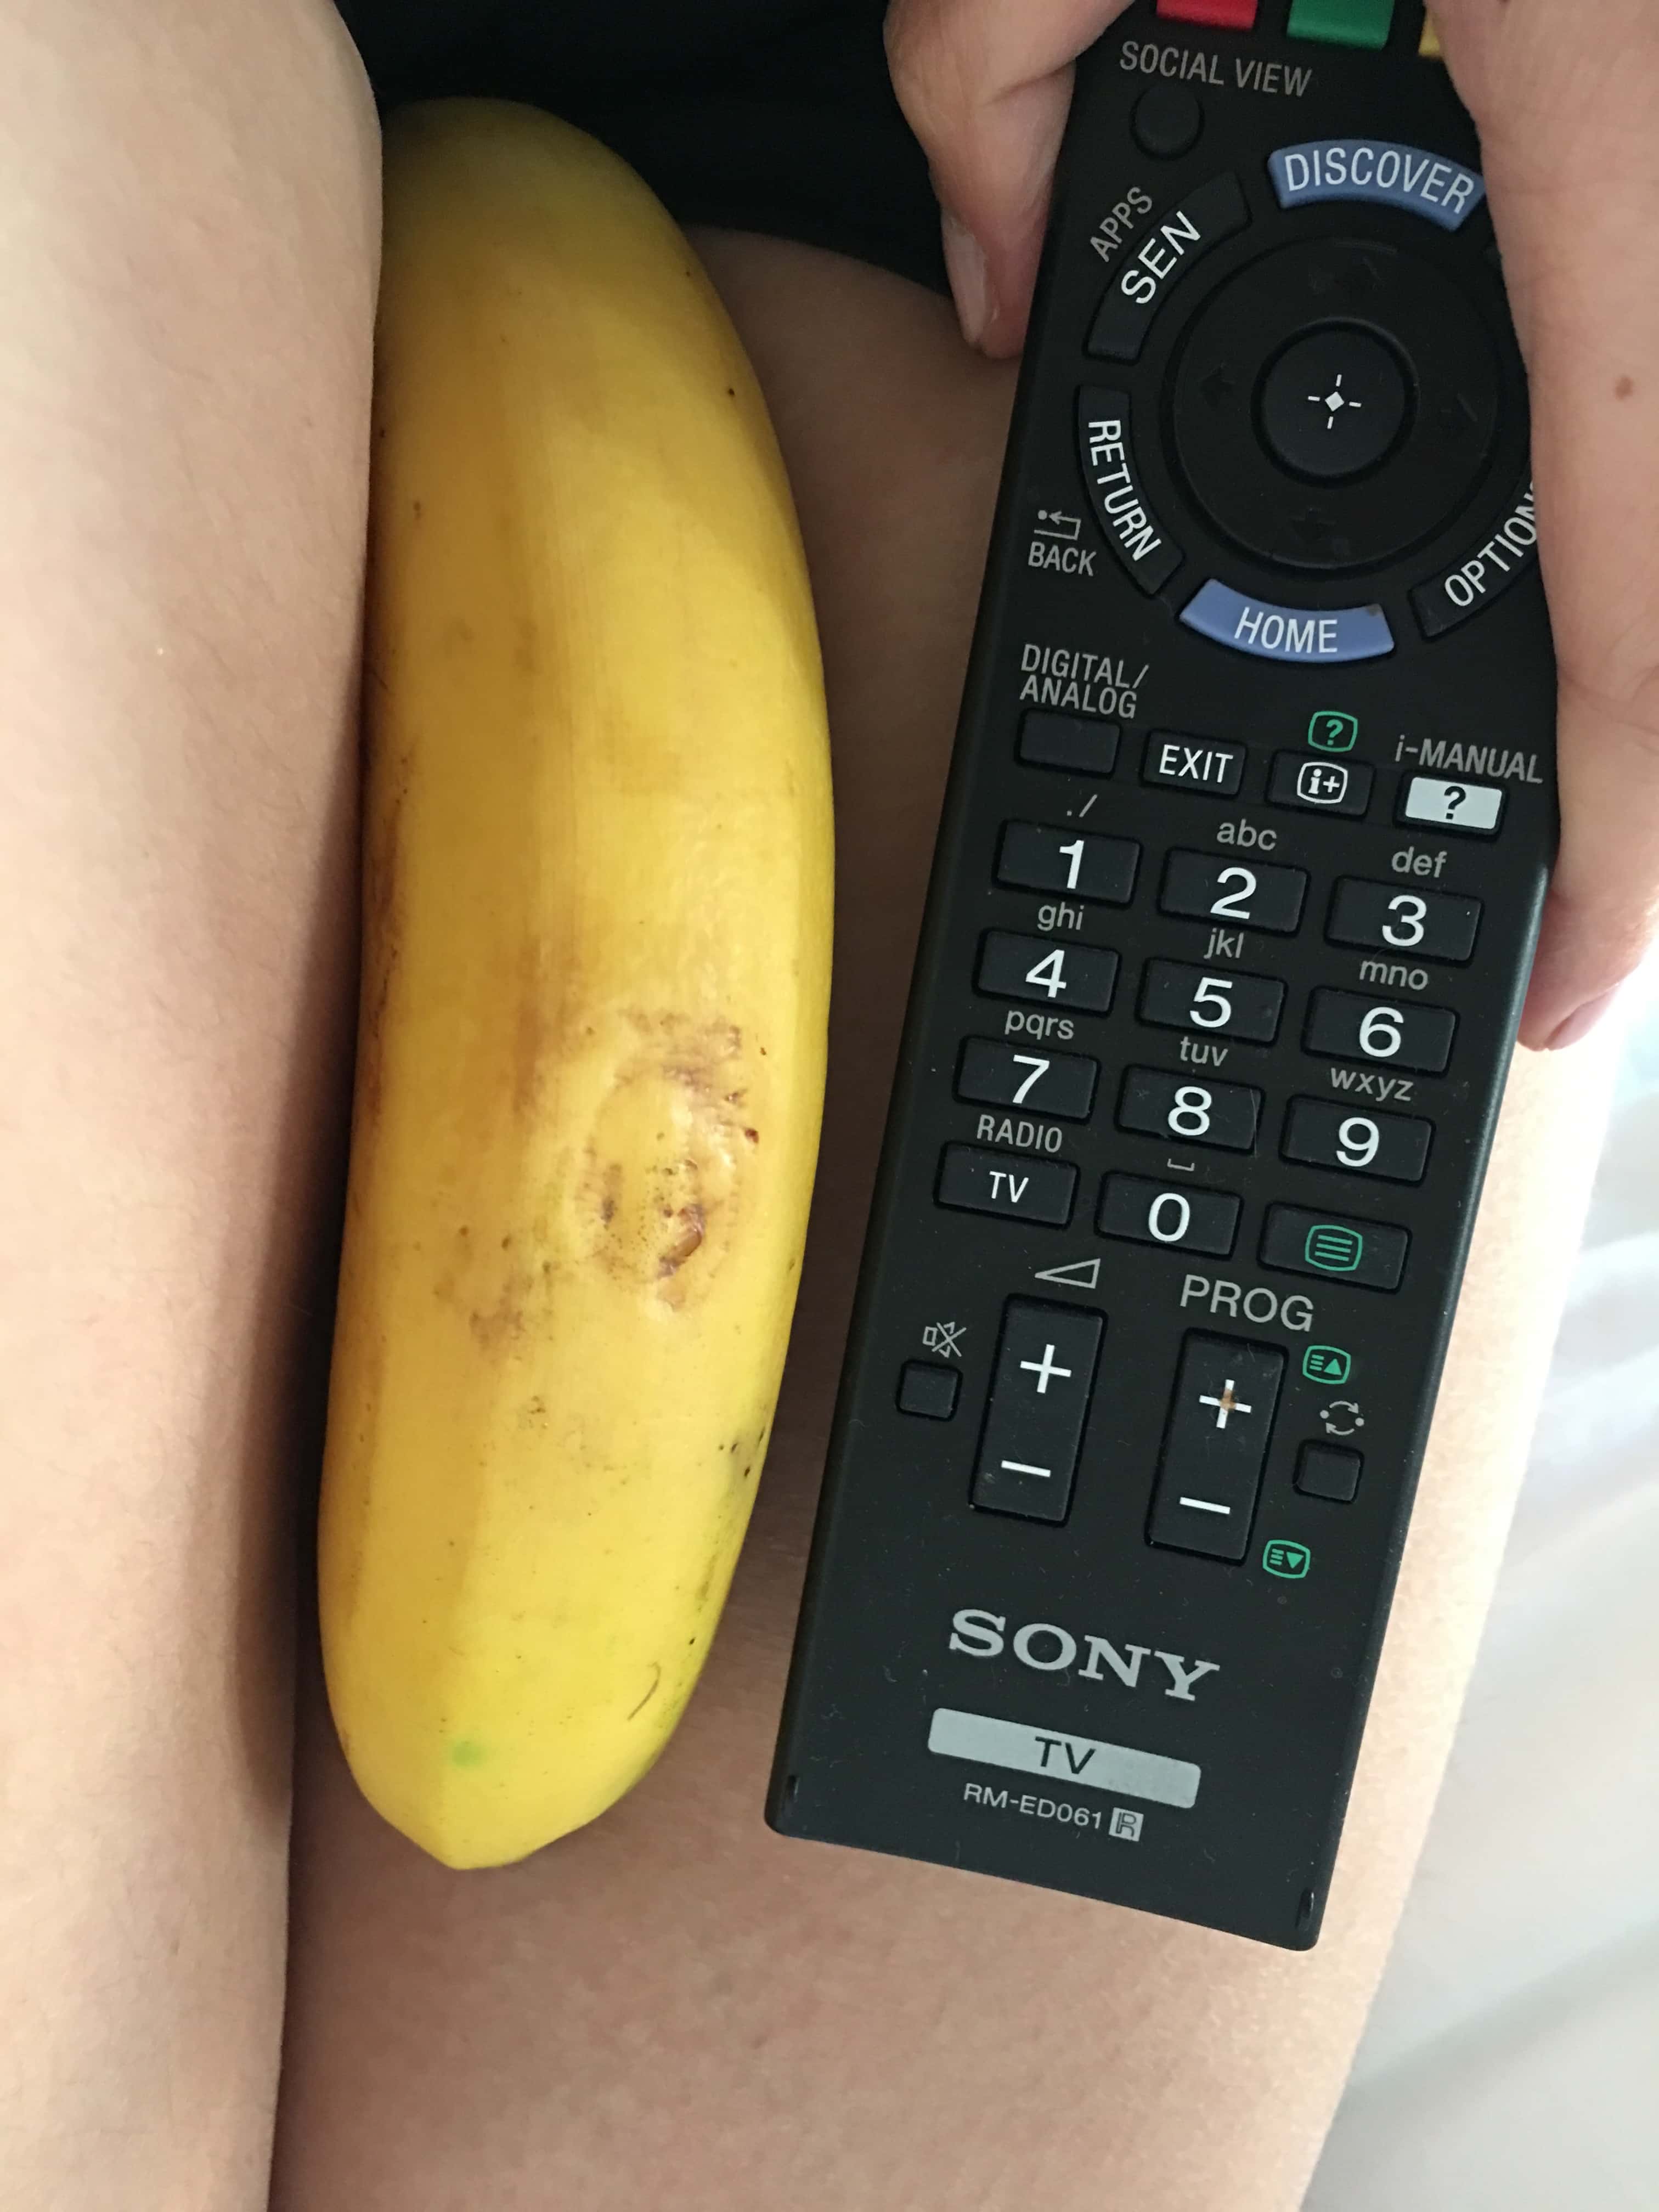 banana photo with a remote control